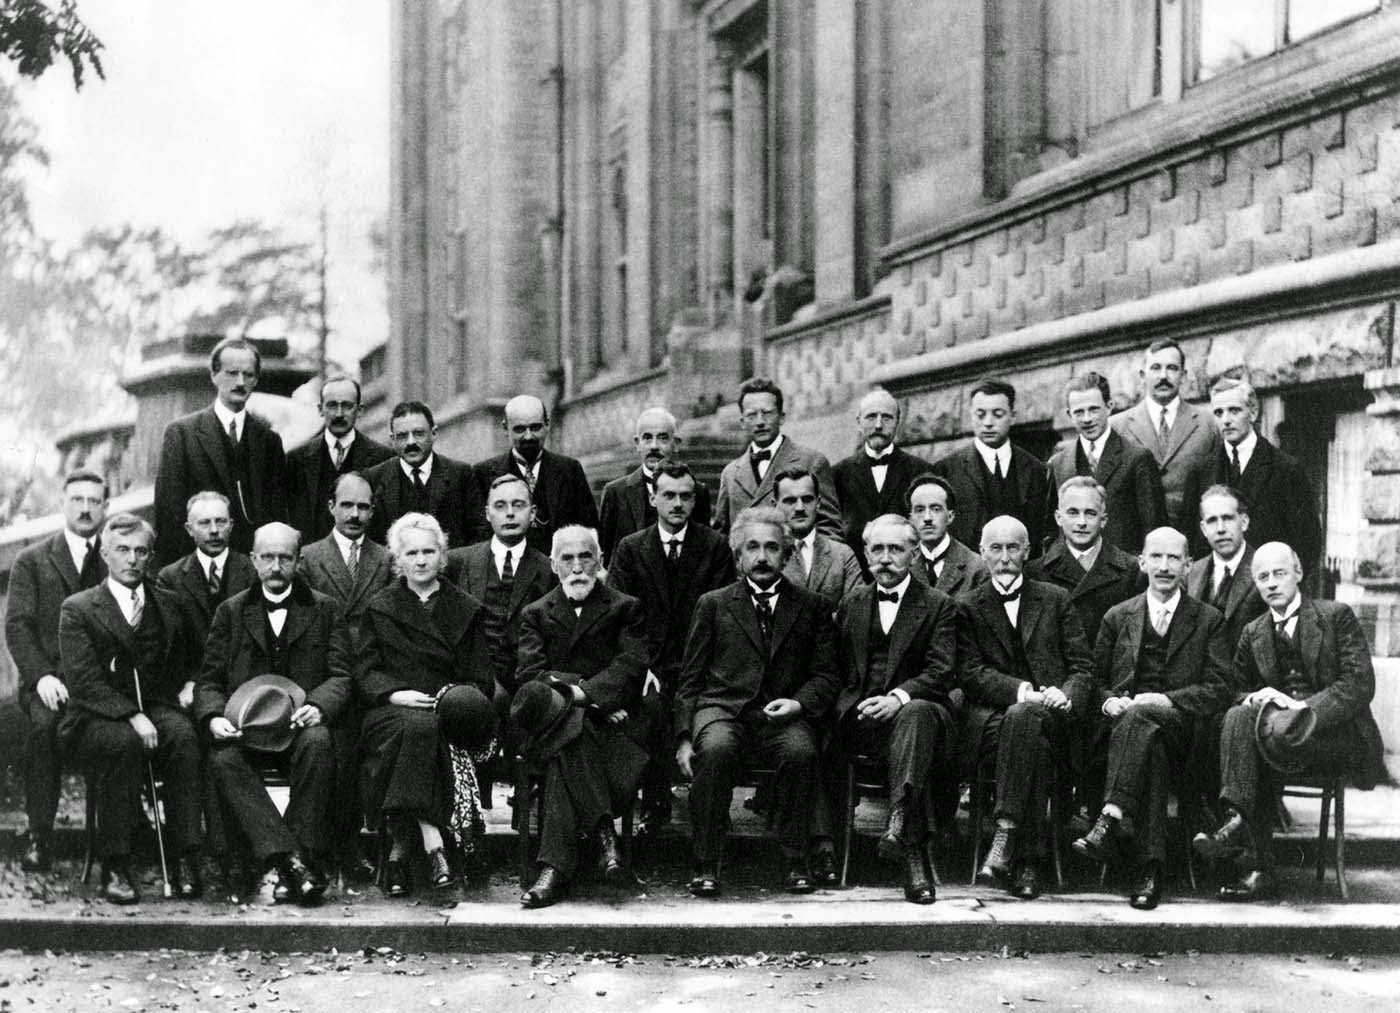 17 of the 29 attendees were or became Nobel Prize winners.